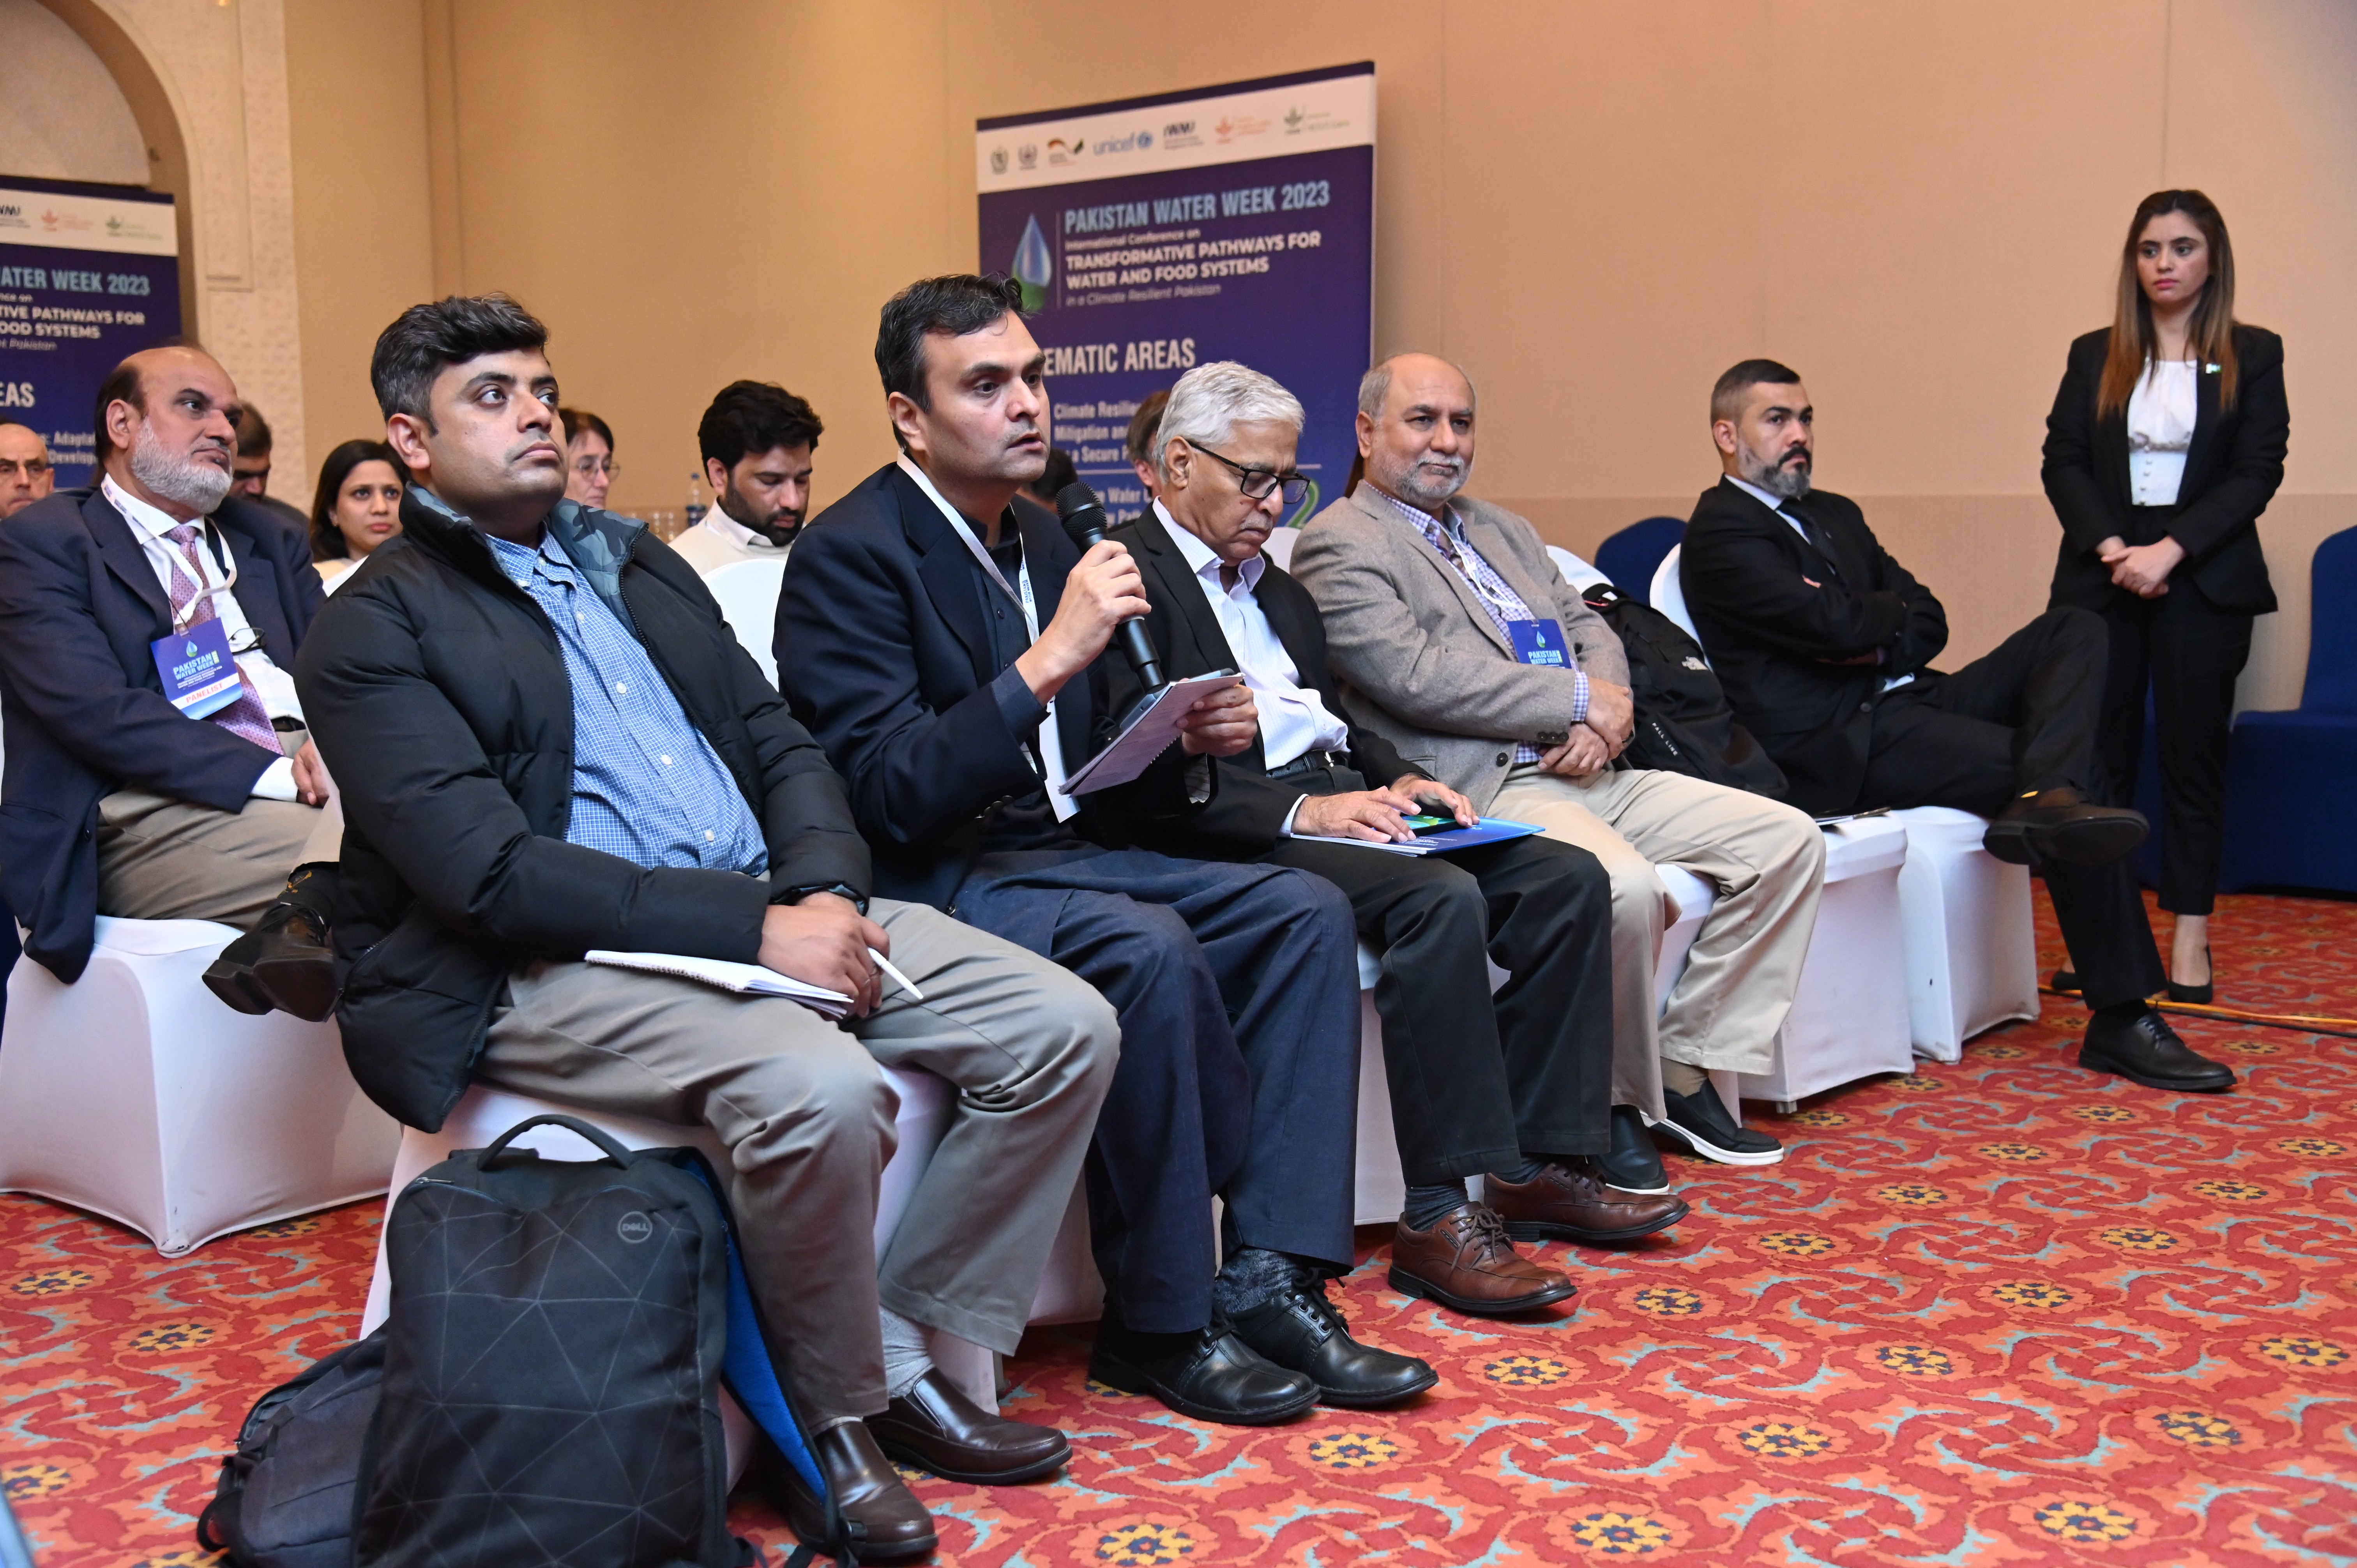 the participants at International Conference & National Workshop on "PAKISTAN WATER WEEK 2023"